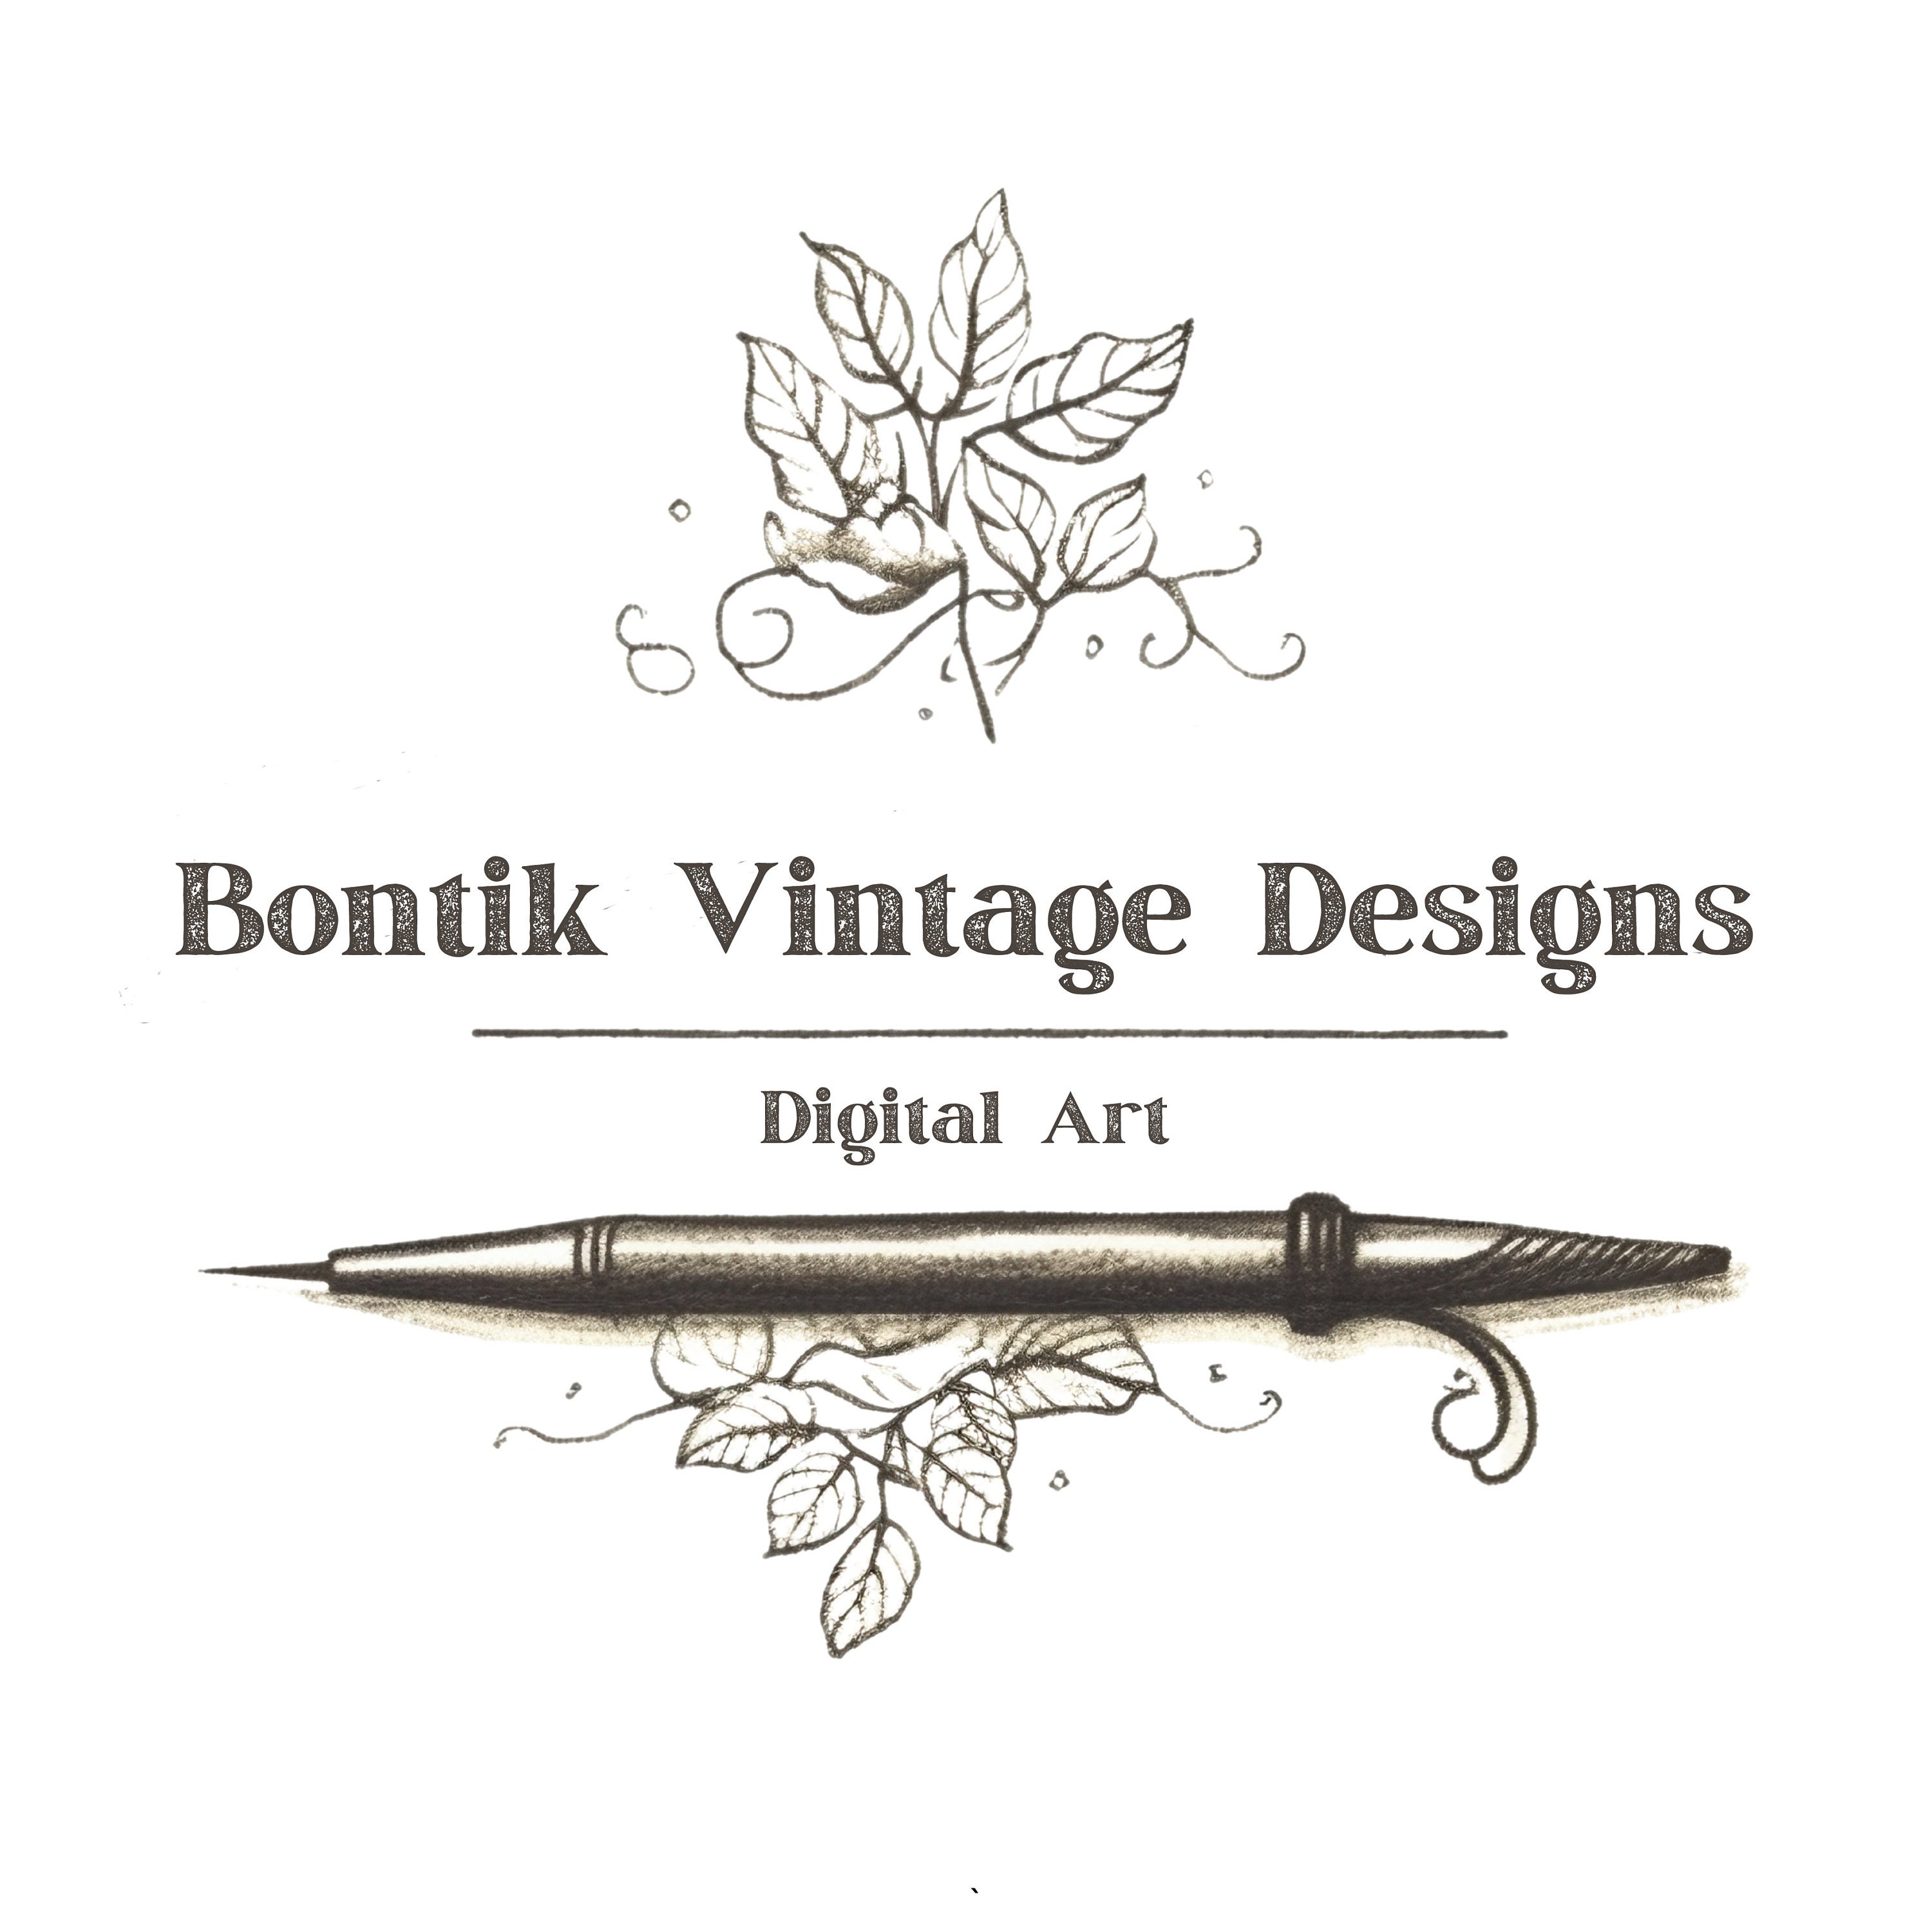 ATC Books, CDs, How-to & More! - products new home - Design Originals  Vintage Ephemera Book & CD